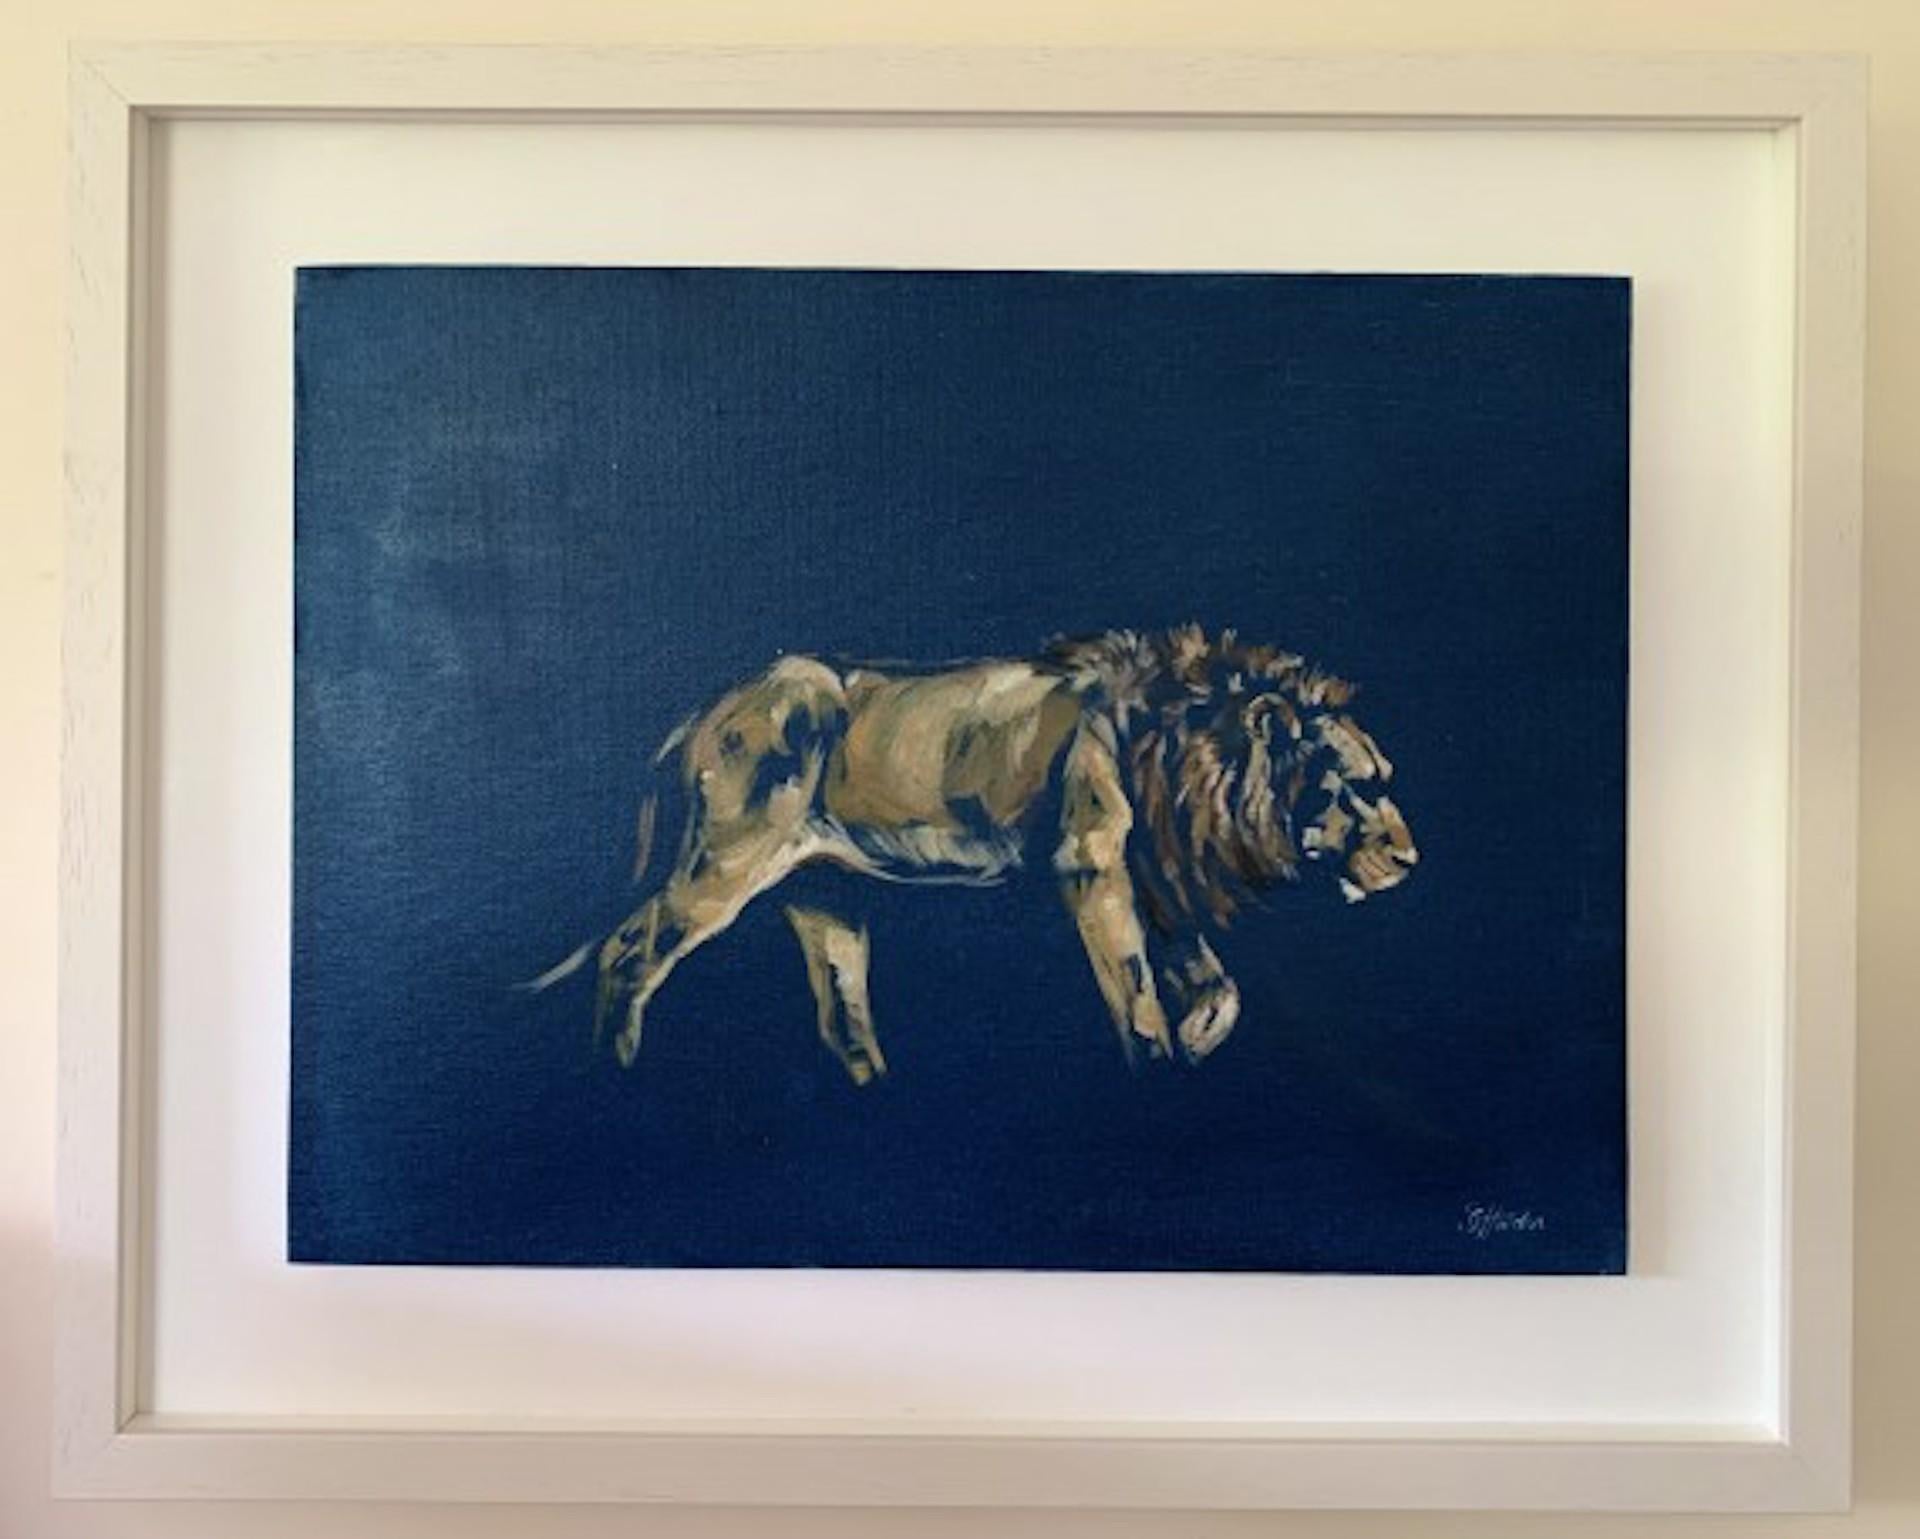 Trundling Lion By Sophie Harden [2021]
Original
Oil on Board
Image size: H:40 cm x W:50 cm
Complete Size of Unframed Work: H:40 cm x W:50 cm x D:1cm
Framed Size: H:44 cm x W:54 cm x D:5cm
Sold Framed
Please note that insitu images are purely an